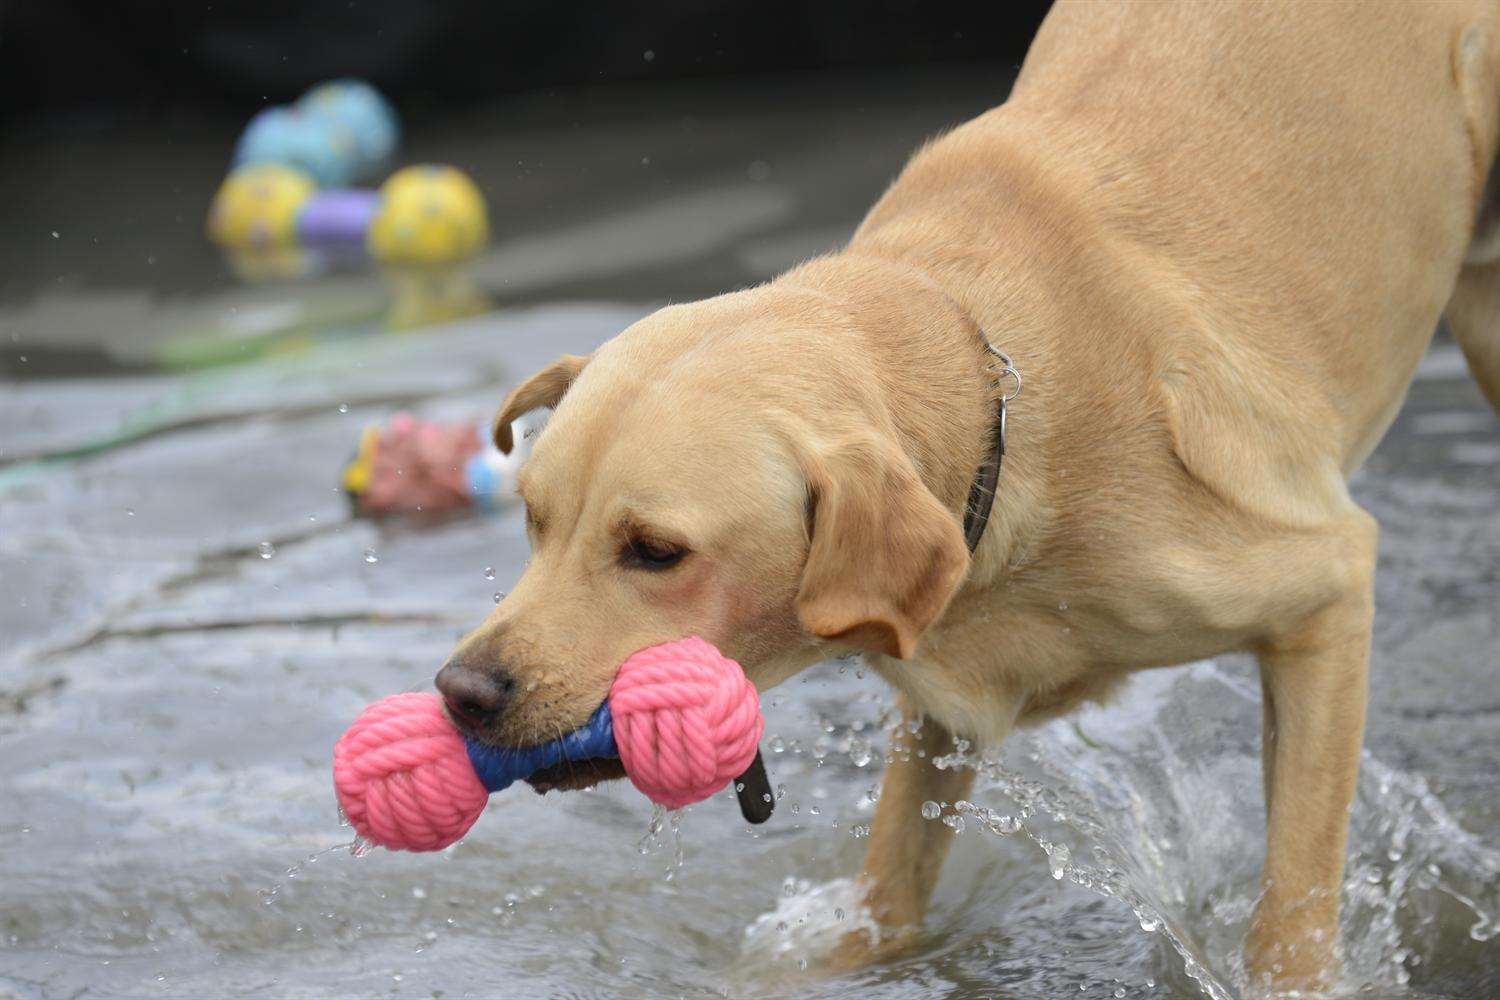 Dogs can get involved in a number of activities during the day